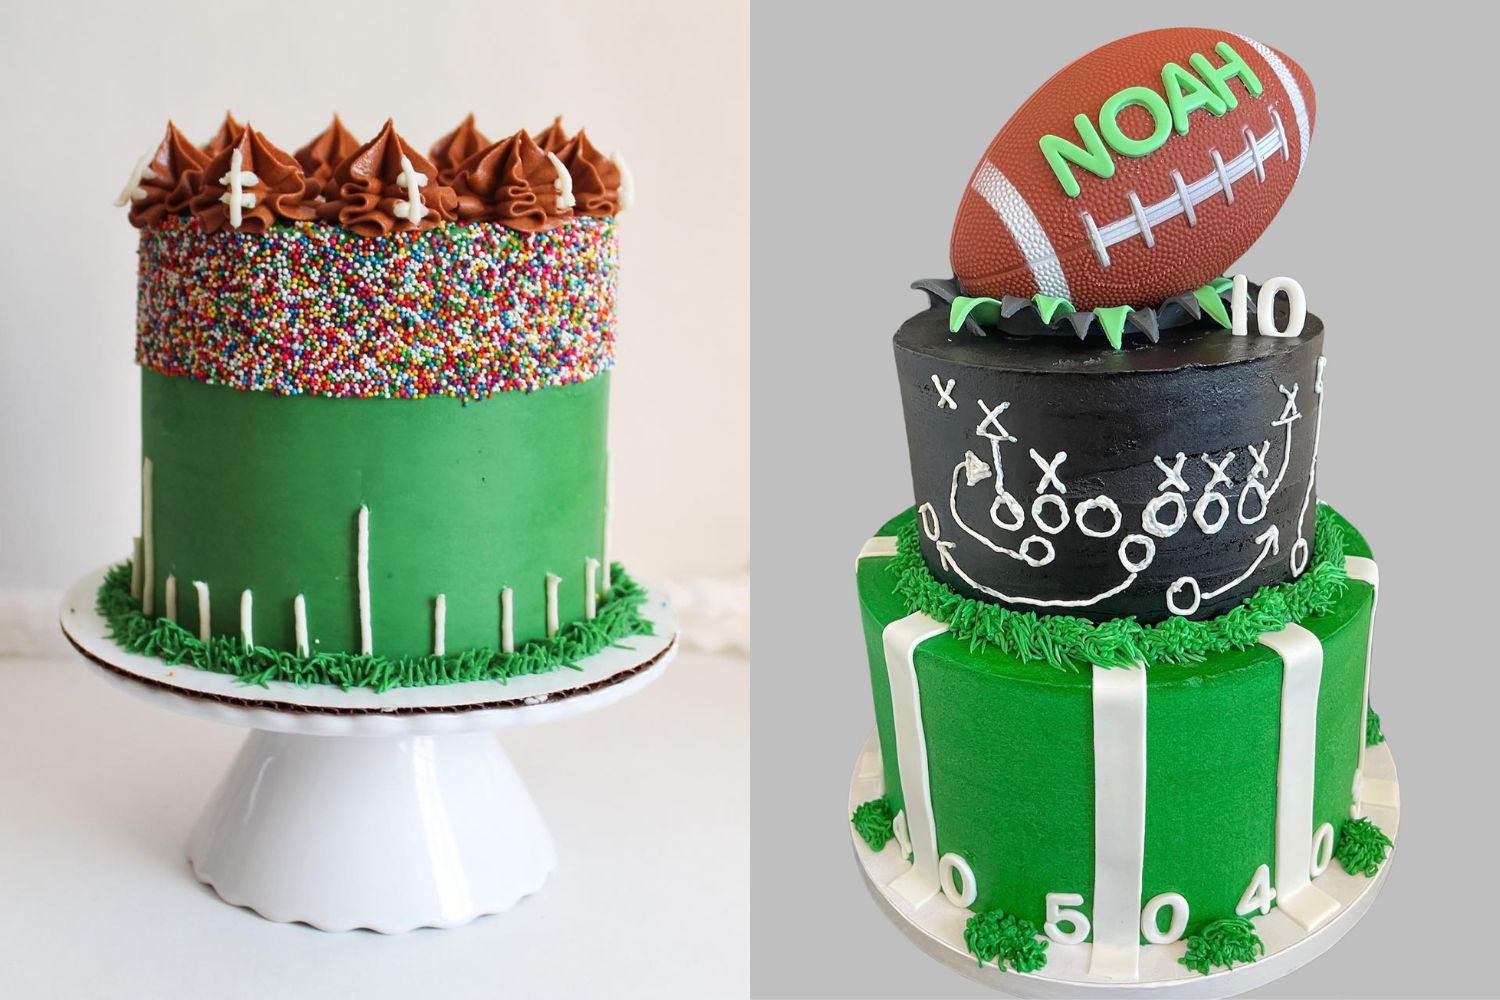 American Football Cake - Decorated Cake by The Billericay - CakesDecor